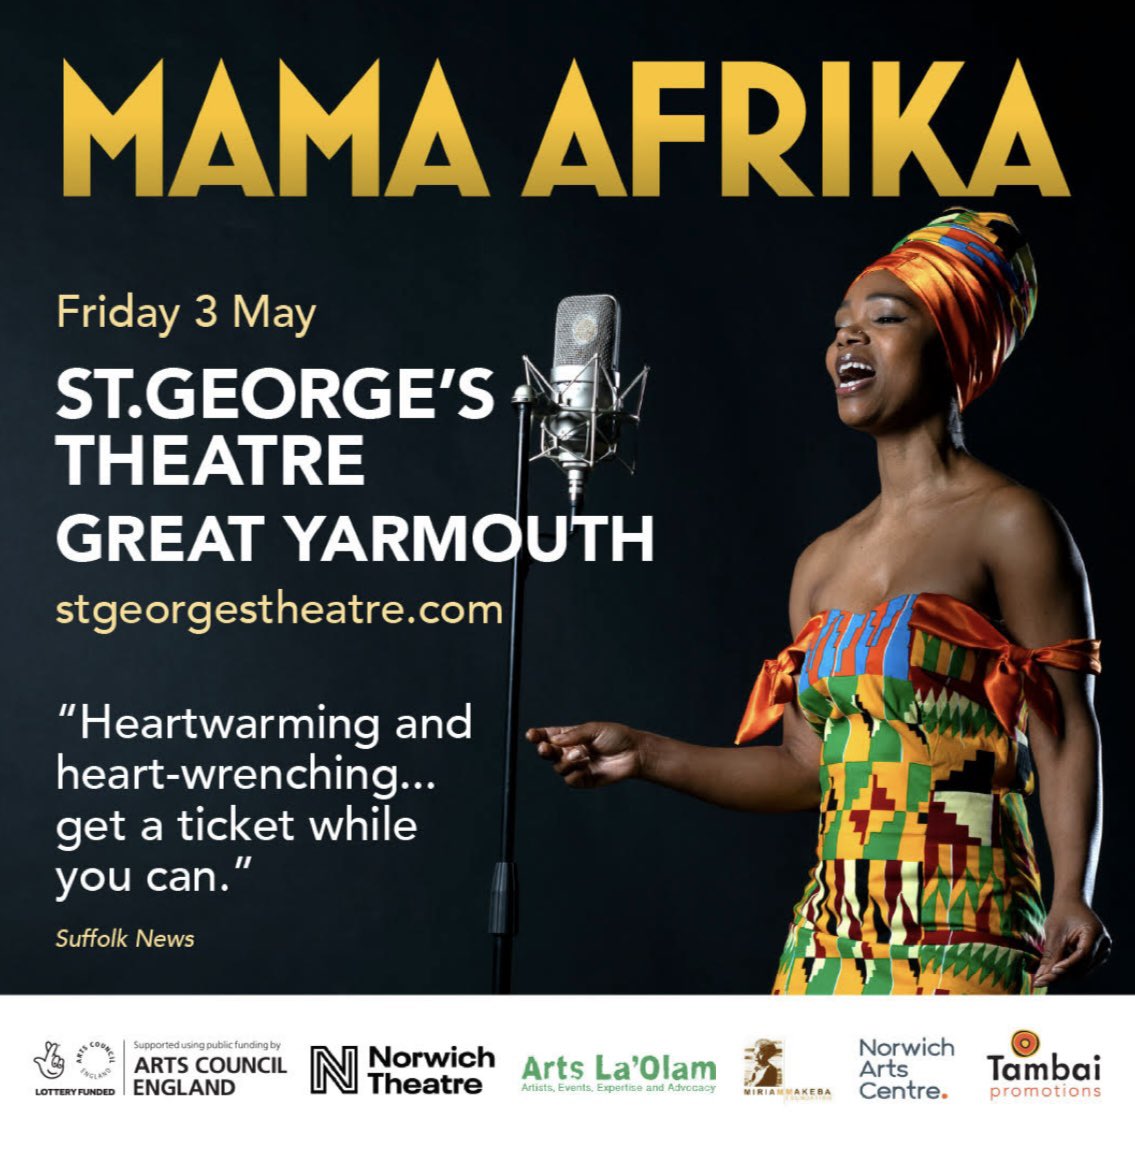 Last chance to reserve your seat! Tickets still available but going fast! Don't miss out!

🌍Mama Afrika
🗓️17 Friday 3rd May
⏰7.30pm
📍St George's Theatre
@StGeorgesGY

🎟️ stgeorgestheatre.ticketsolve.com/ticketbooth/sh…

@outtherearts

#AnnaMudeka #MamaAfrika #LetsCreate #GreatYarmouth